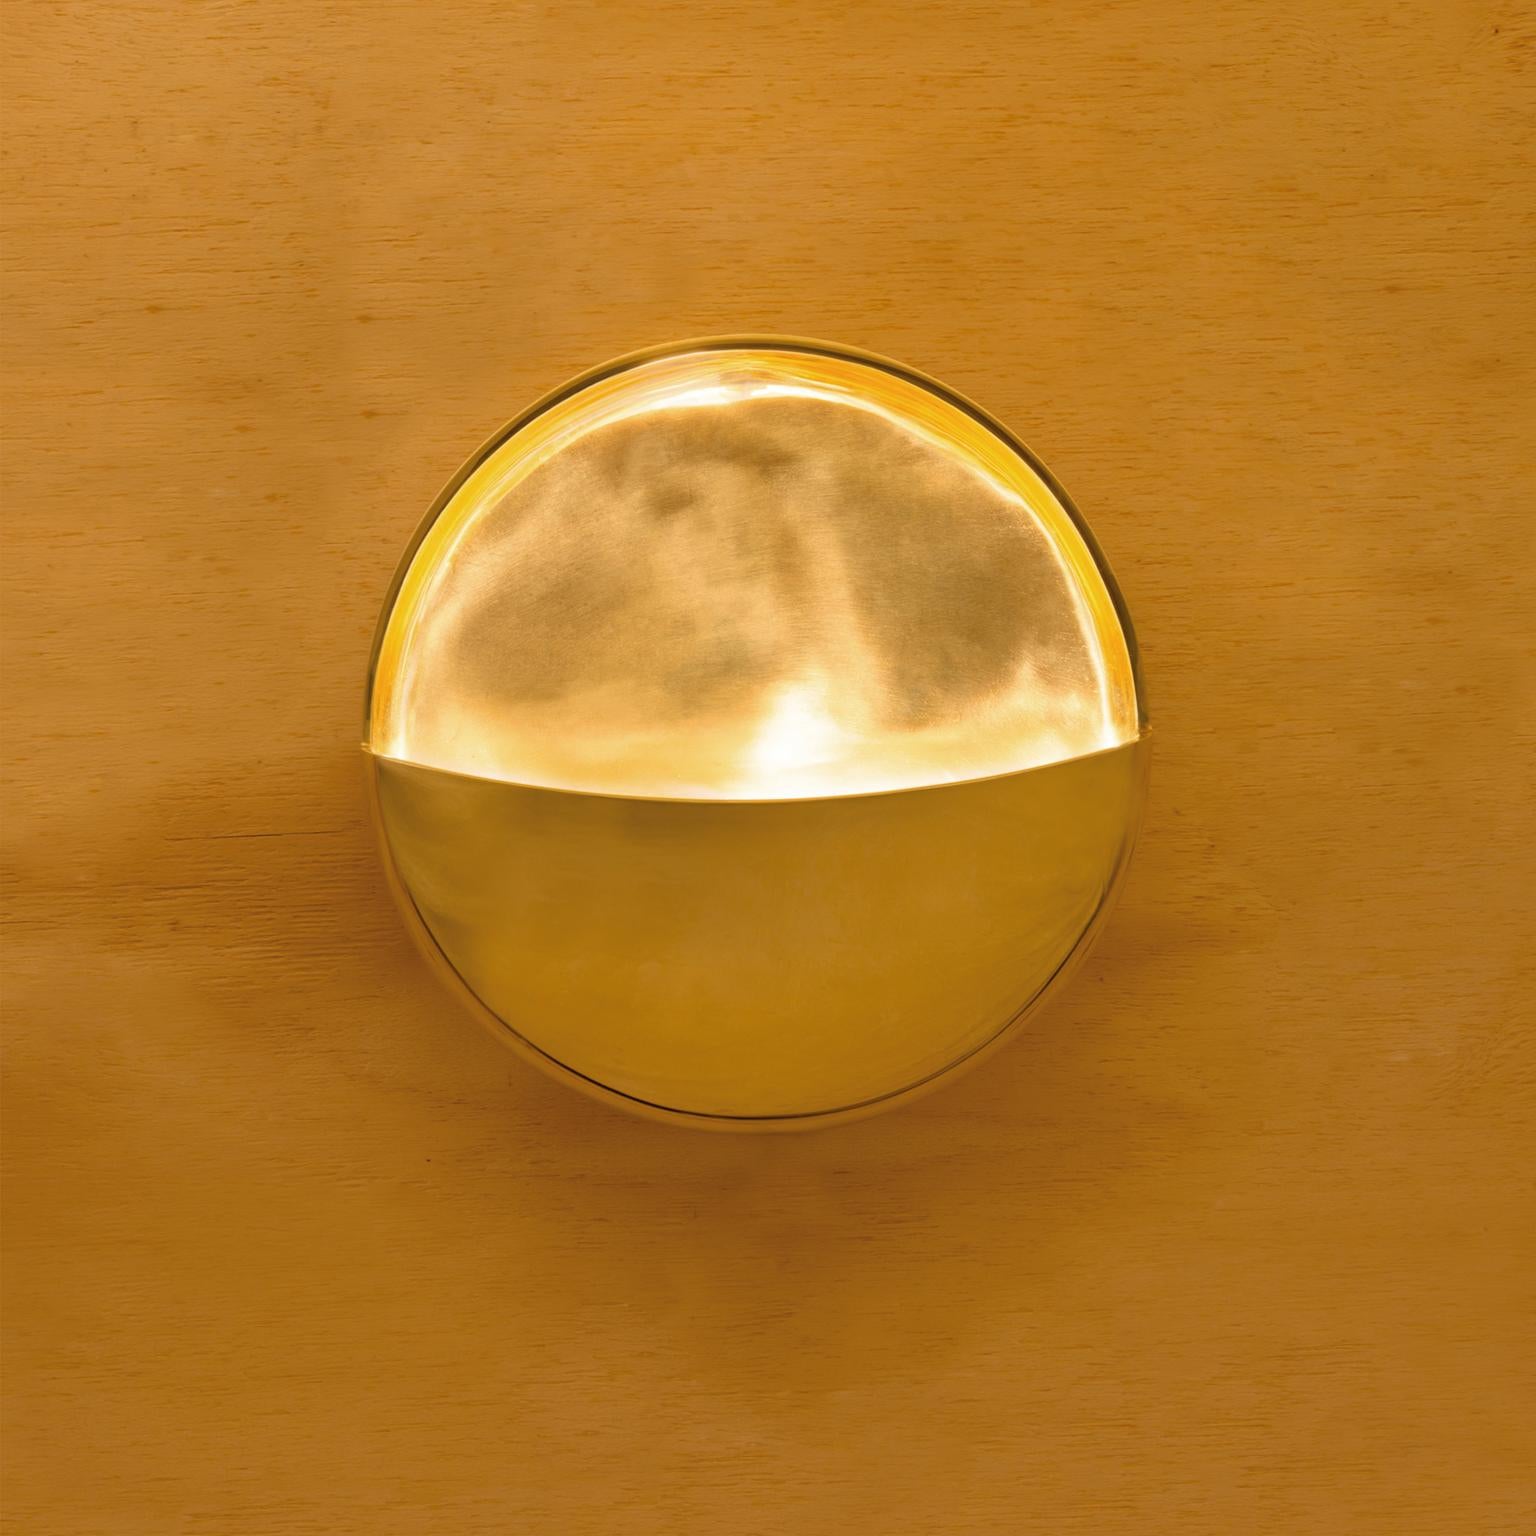 This sconce was meticulously handmade by master artisans one piece at a time. It is therefore quite difficult, if not impossible to make identical items. The brass casting is produced by formation of a mold from a mixture of sand and the liquid